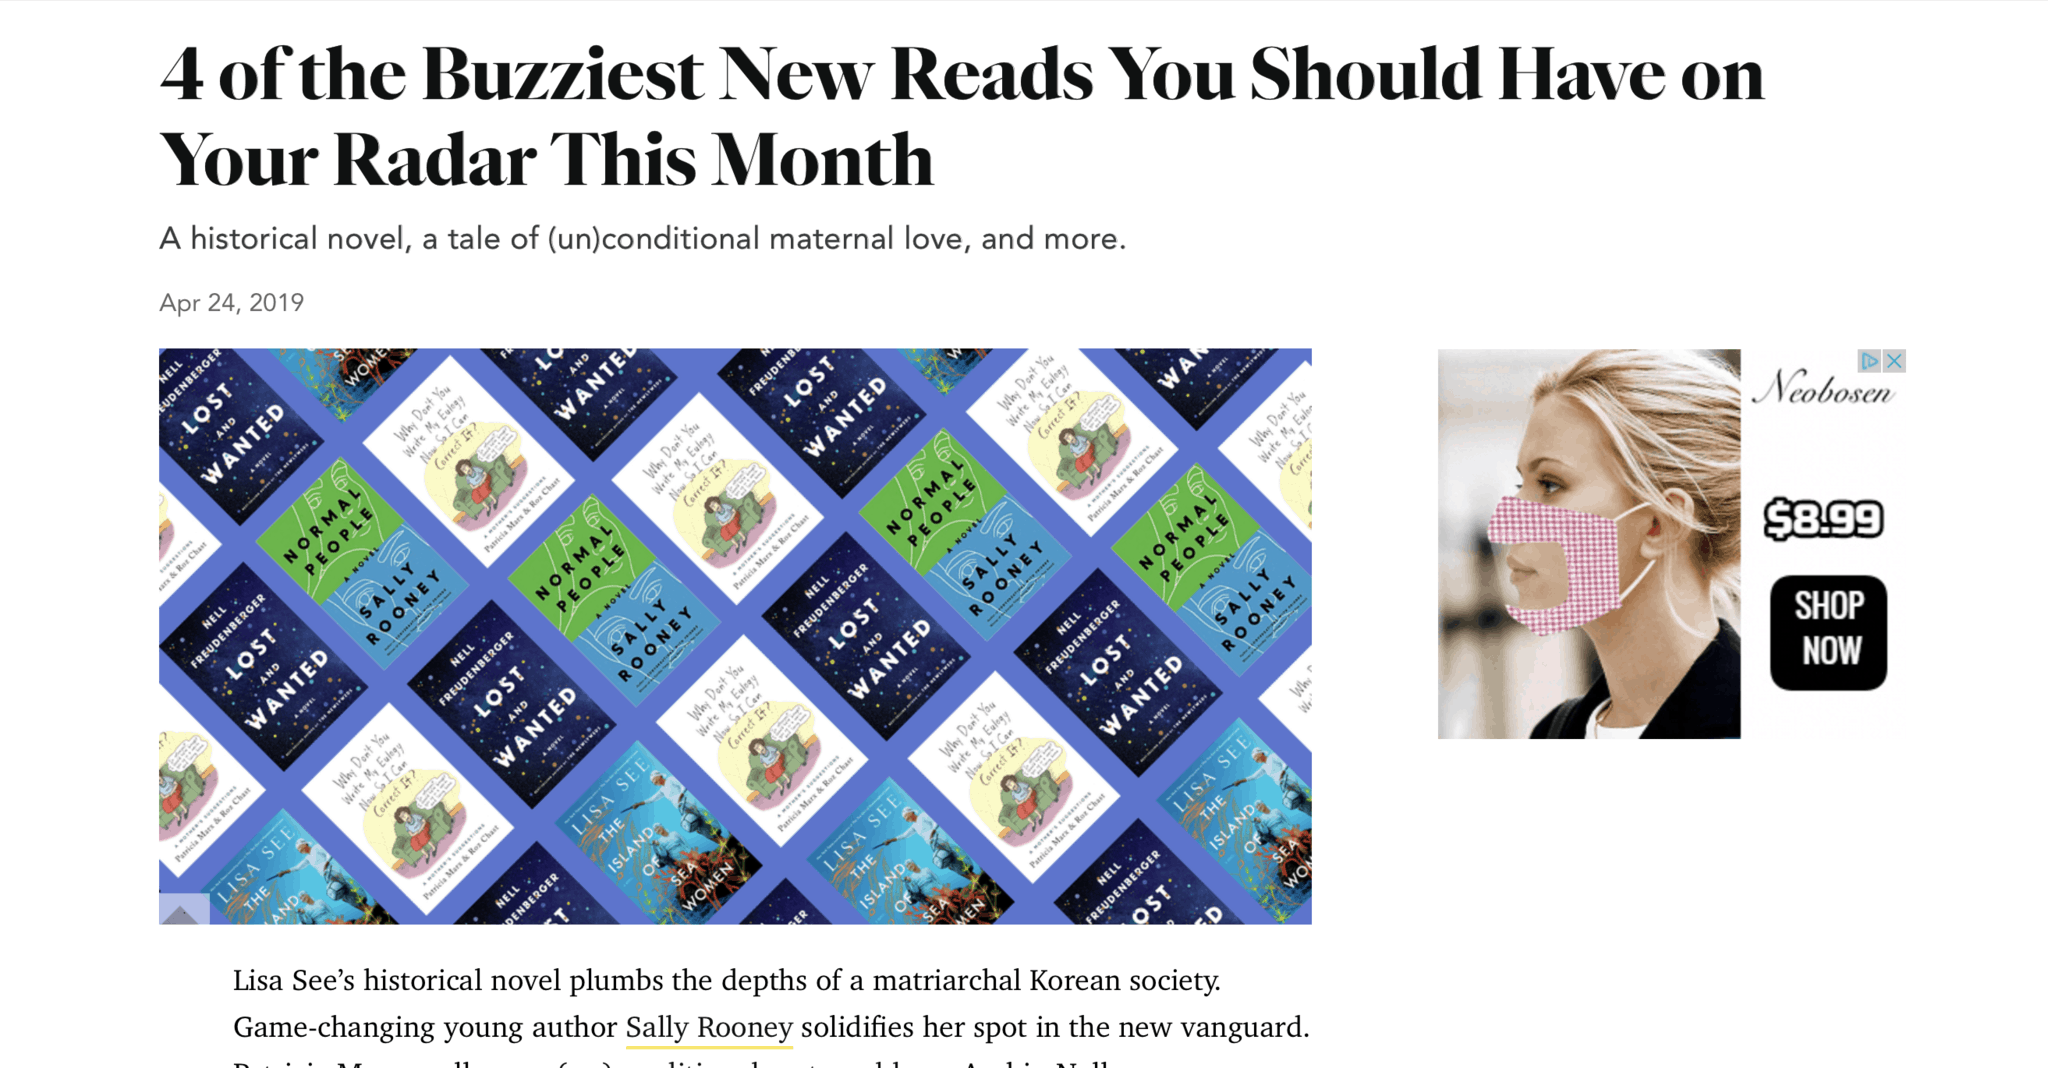 Island of Sea Women among the Most “Buzziest” of Reads, According to Oprah Magazine